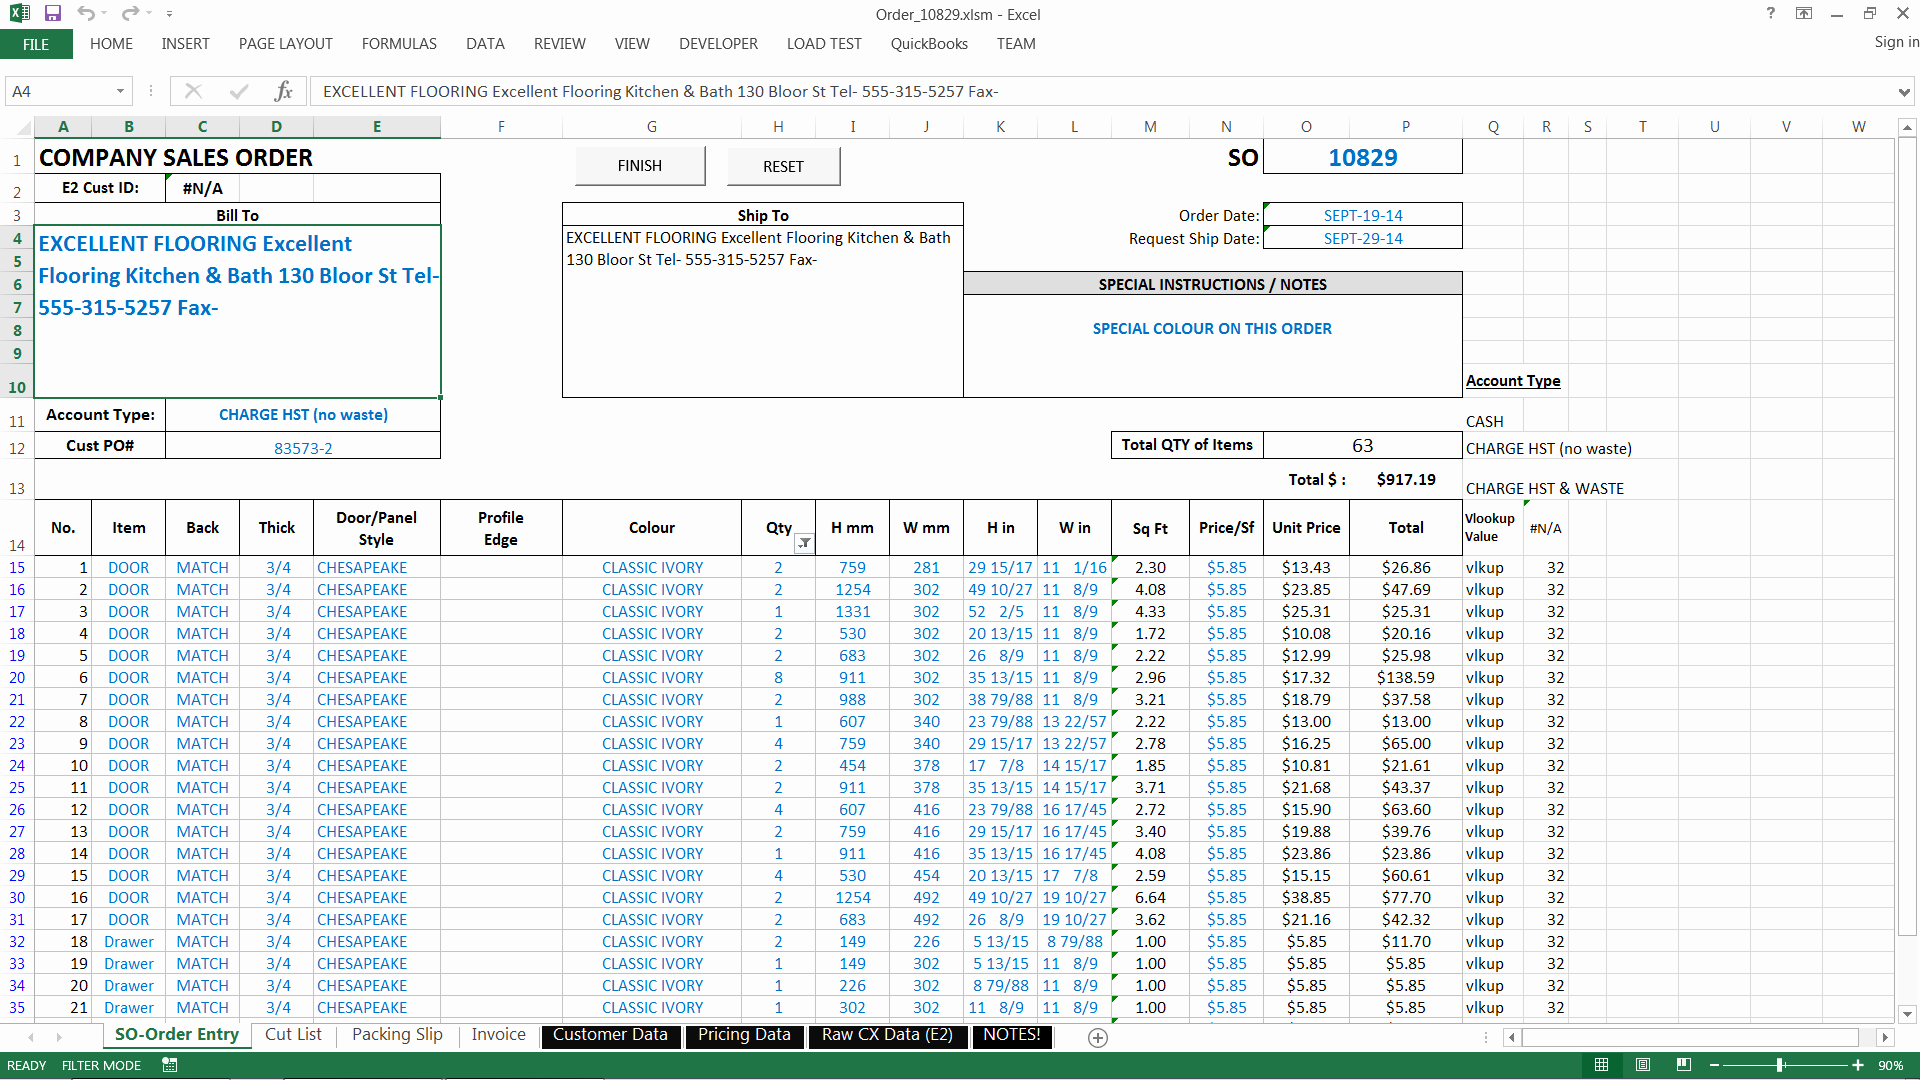 Purchase order Tracking Excel Sheet Lovely Customer order Tracking Excel Template